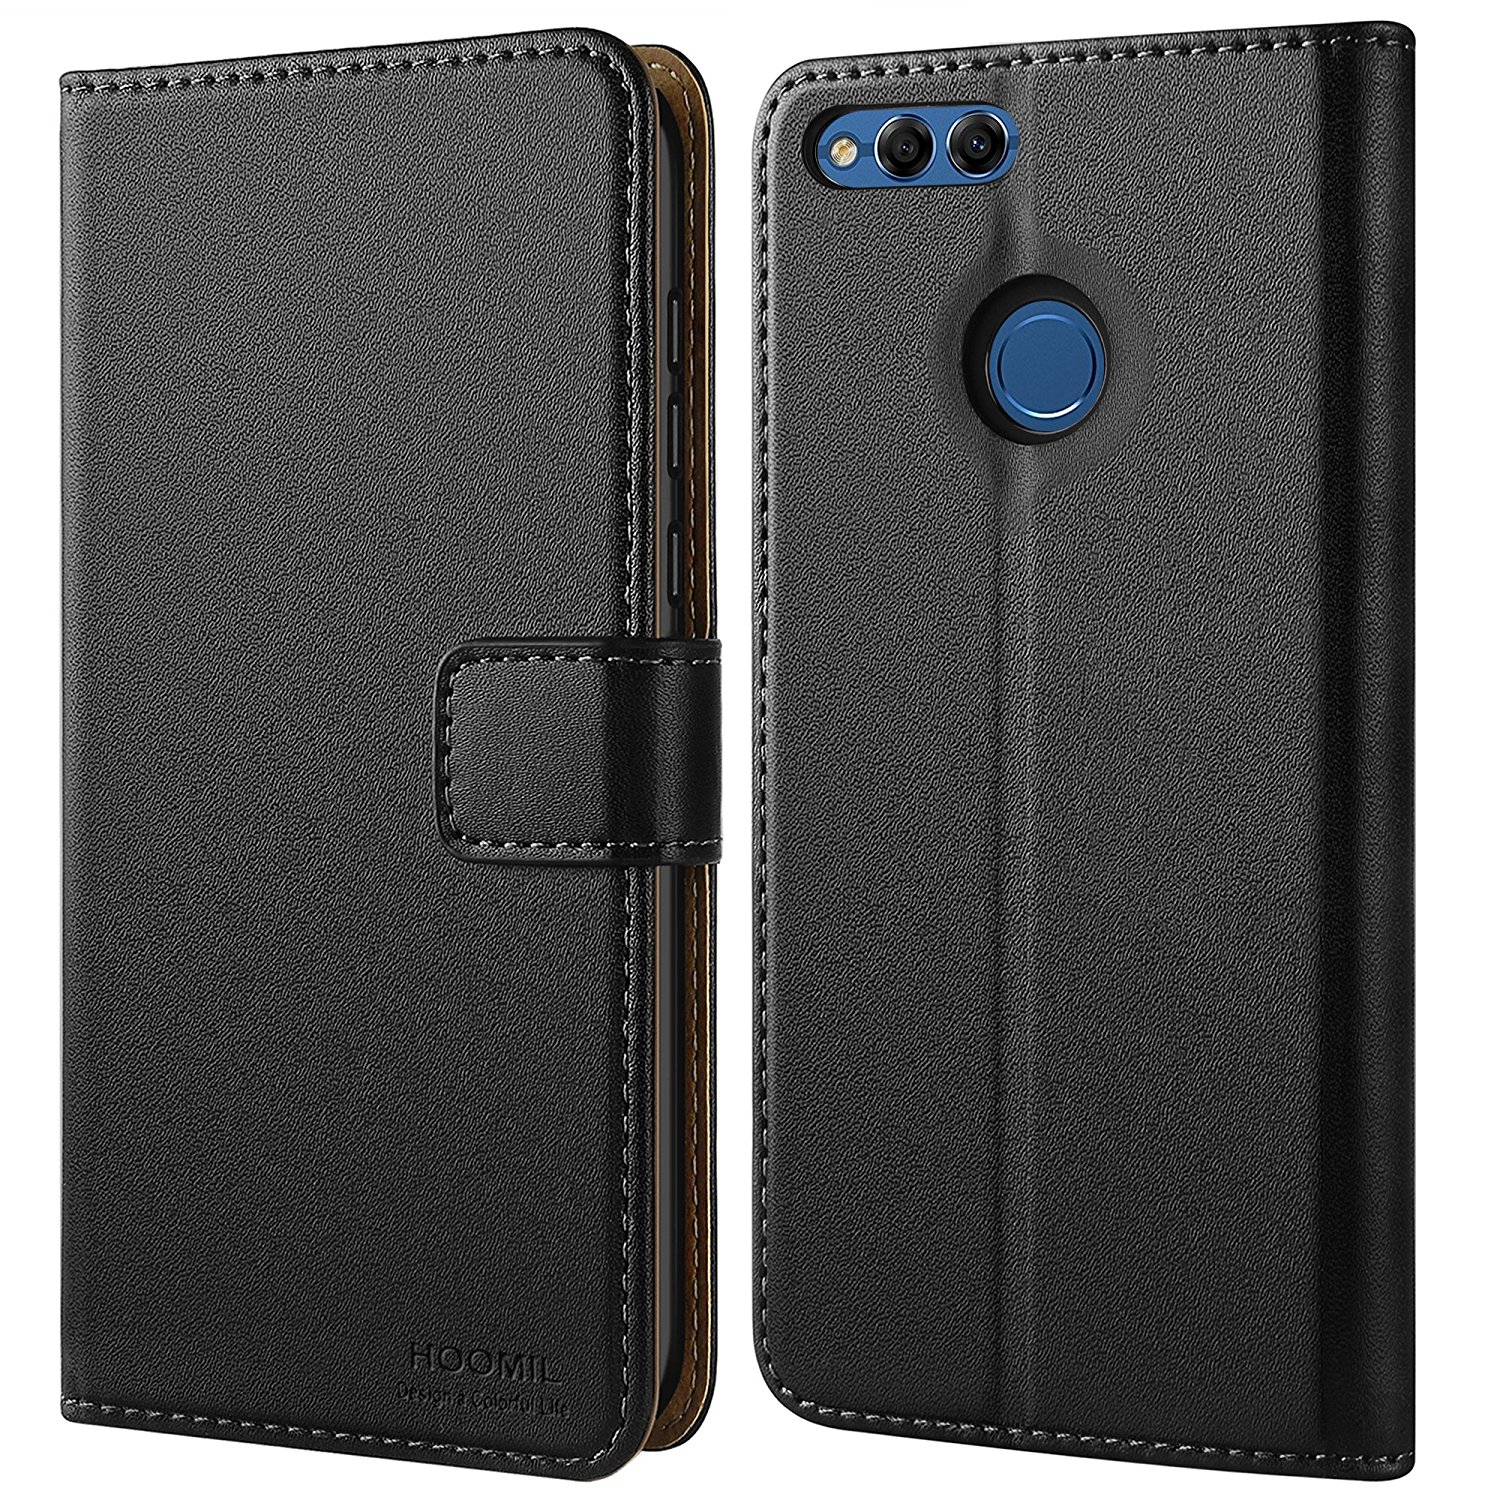 HUAWEI Mate SE cases - Hoomil